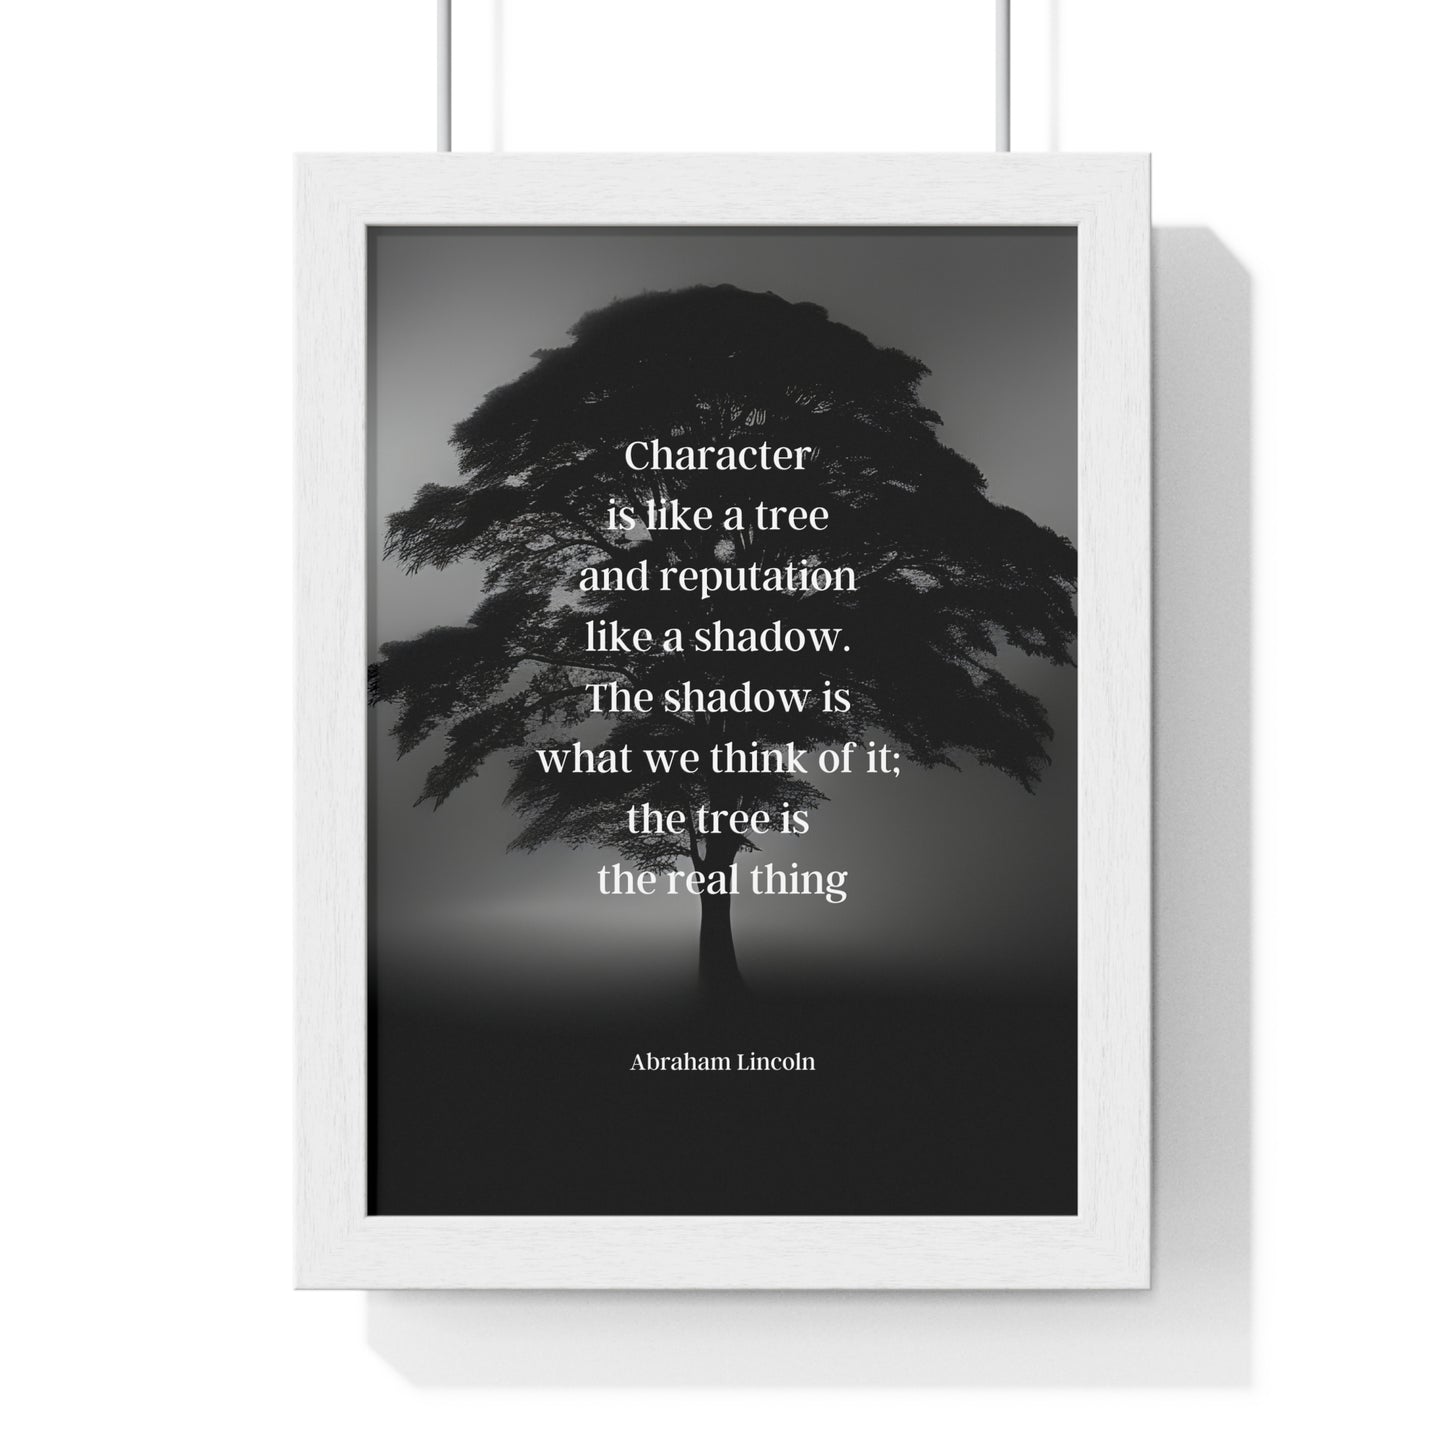 Abraham Lincoln Quote 10, Poster Art, Tree of Truth, Character, Shadow, 16th President of the United States, American Patriots, AI Art, Political Art, Presidential Quotes, Inspirational Quotes